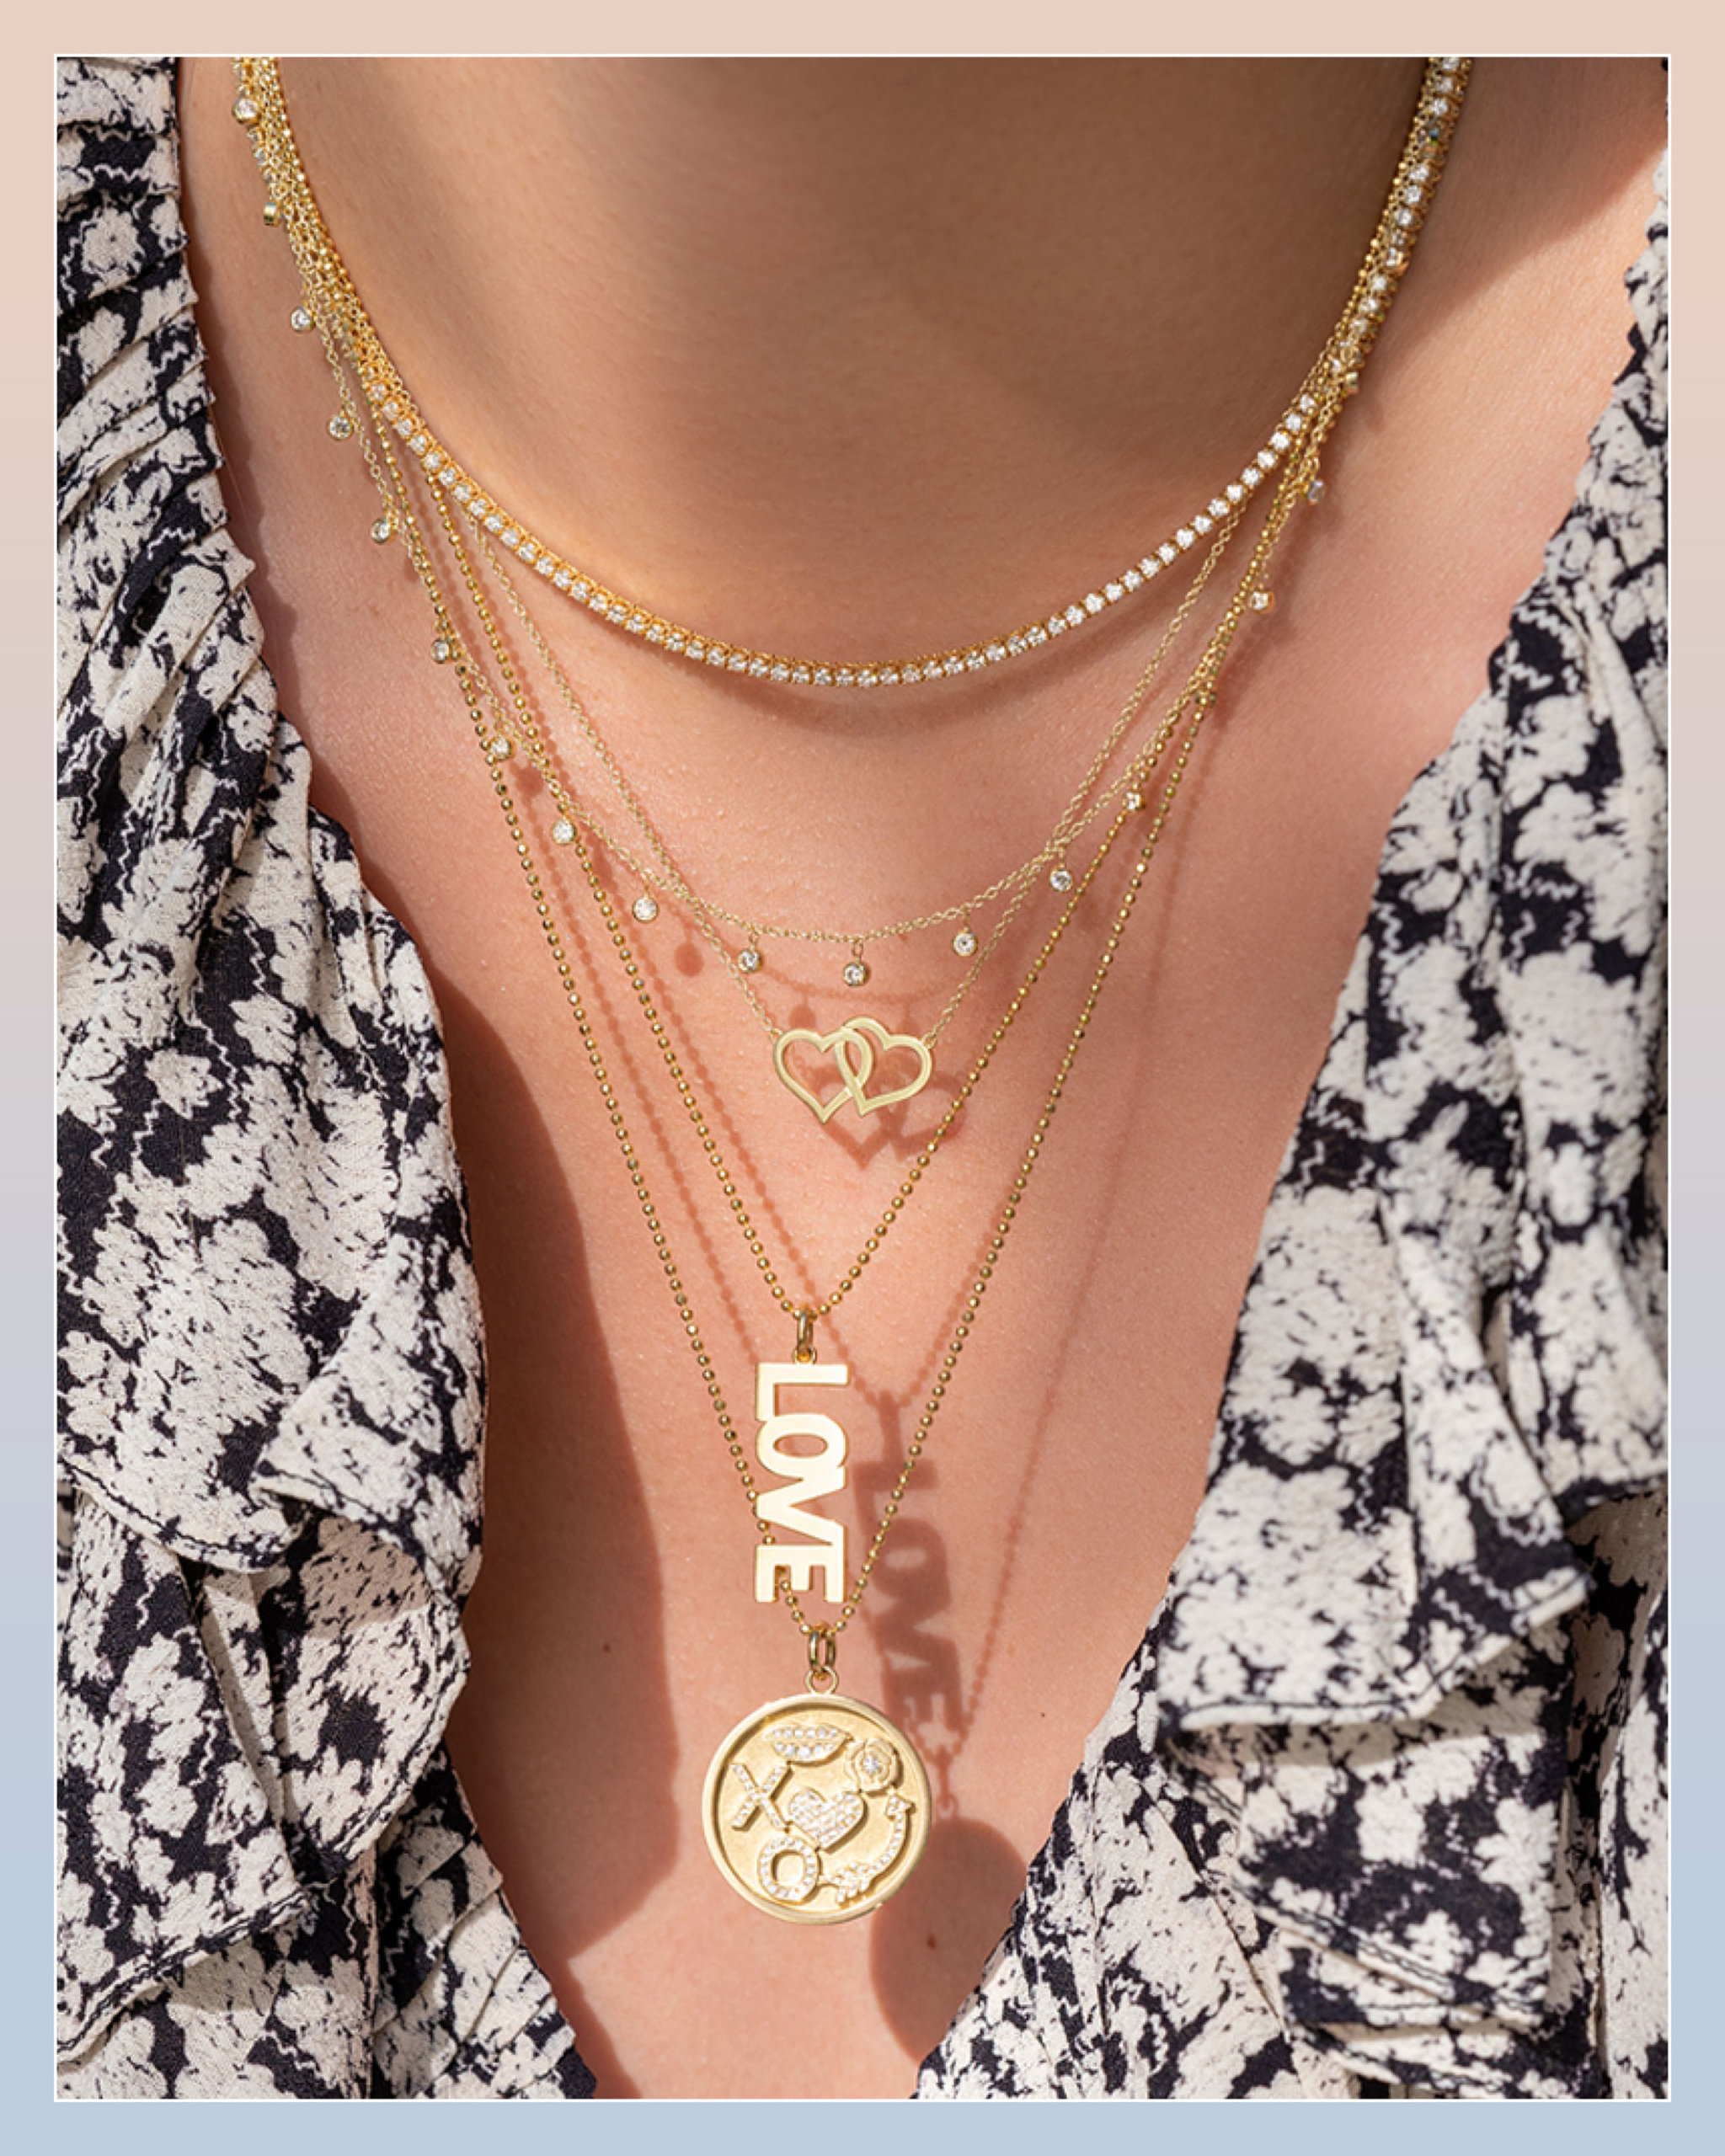 Diamond tennis necklace and diamond charm necklace paired with gold pendant, love & heart necklaces by Jennifer Meyer